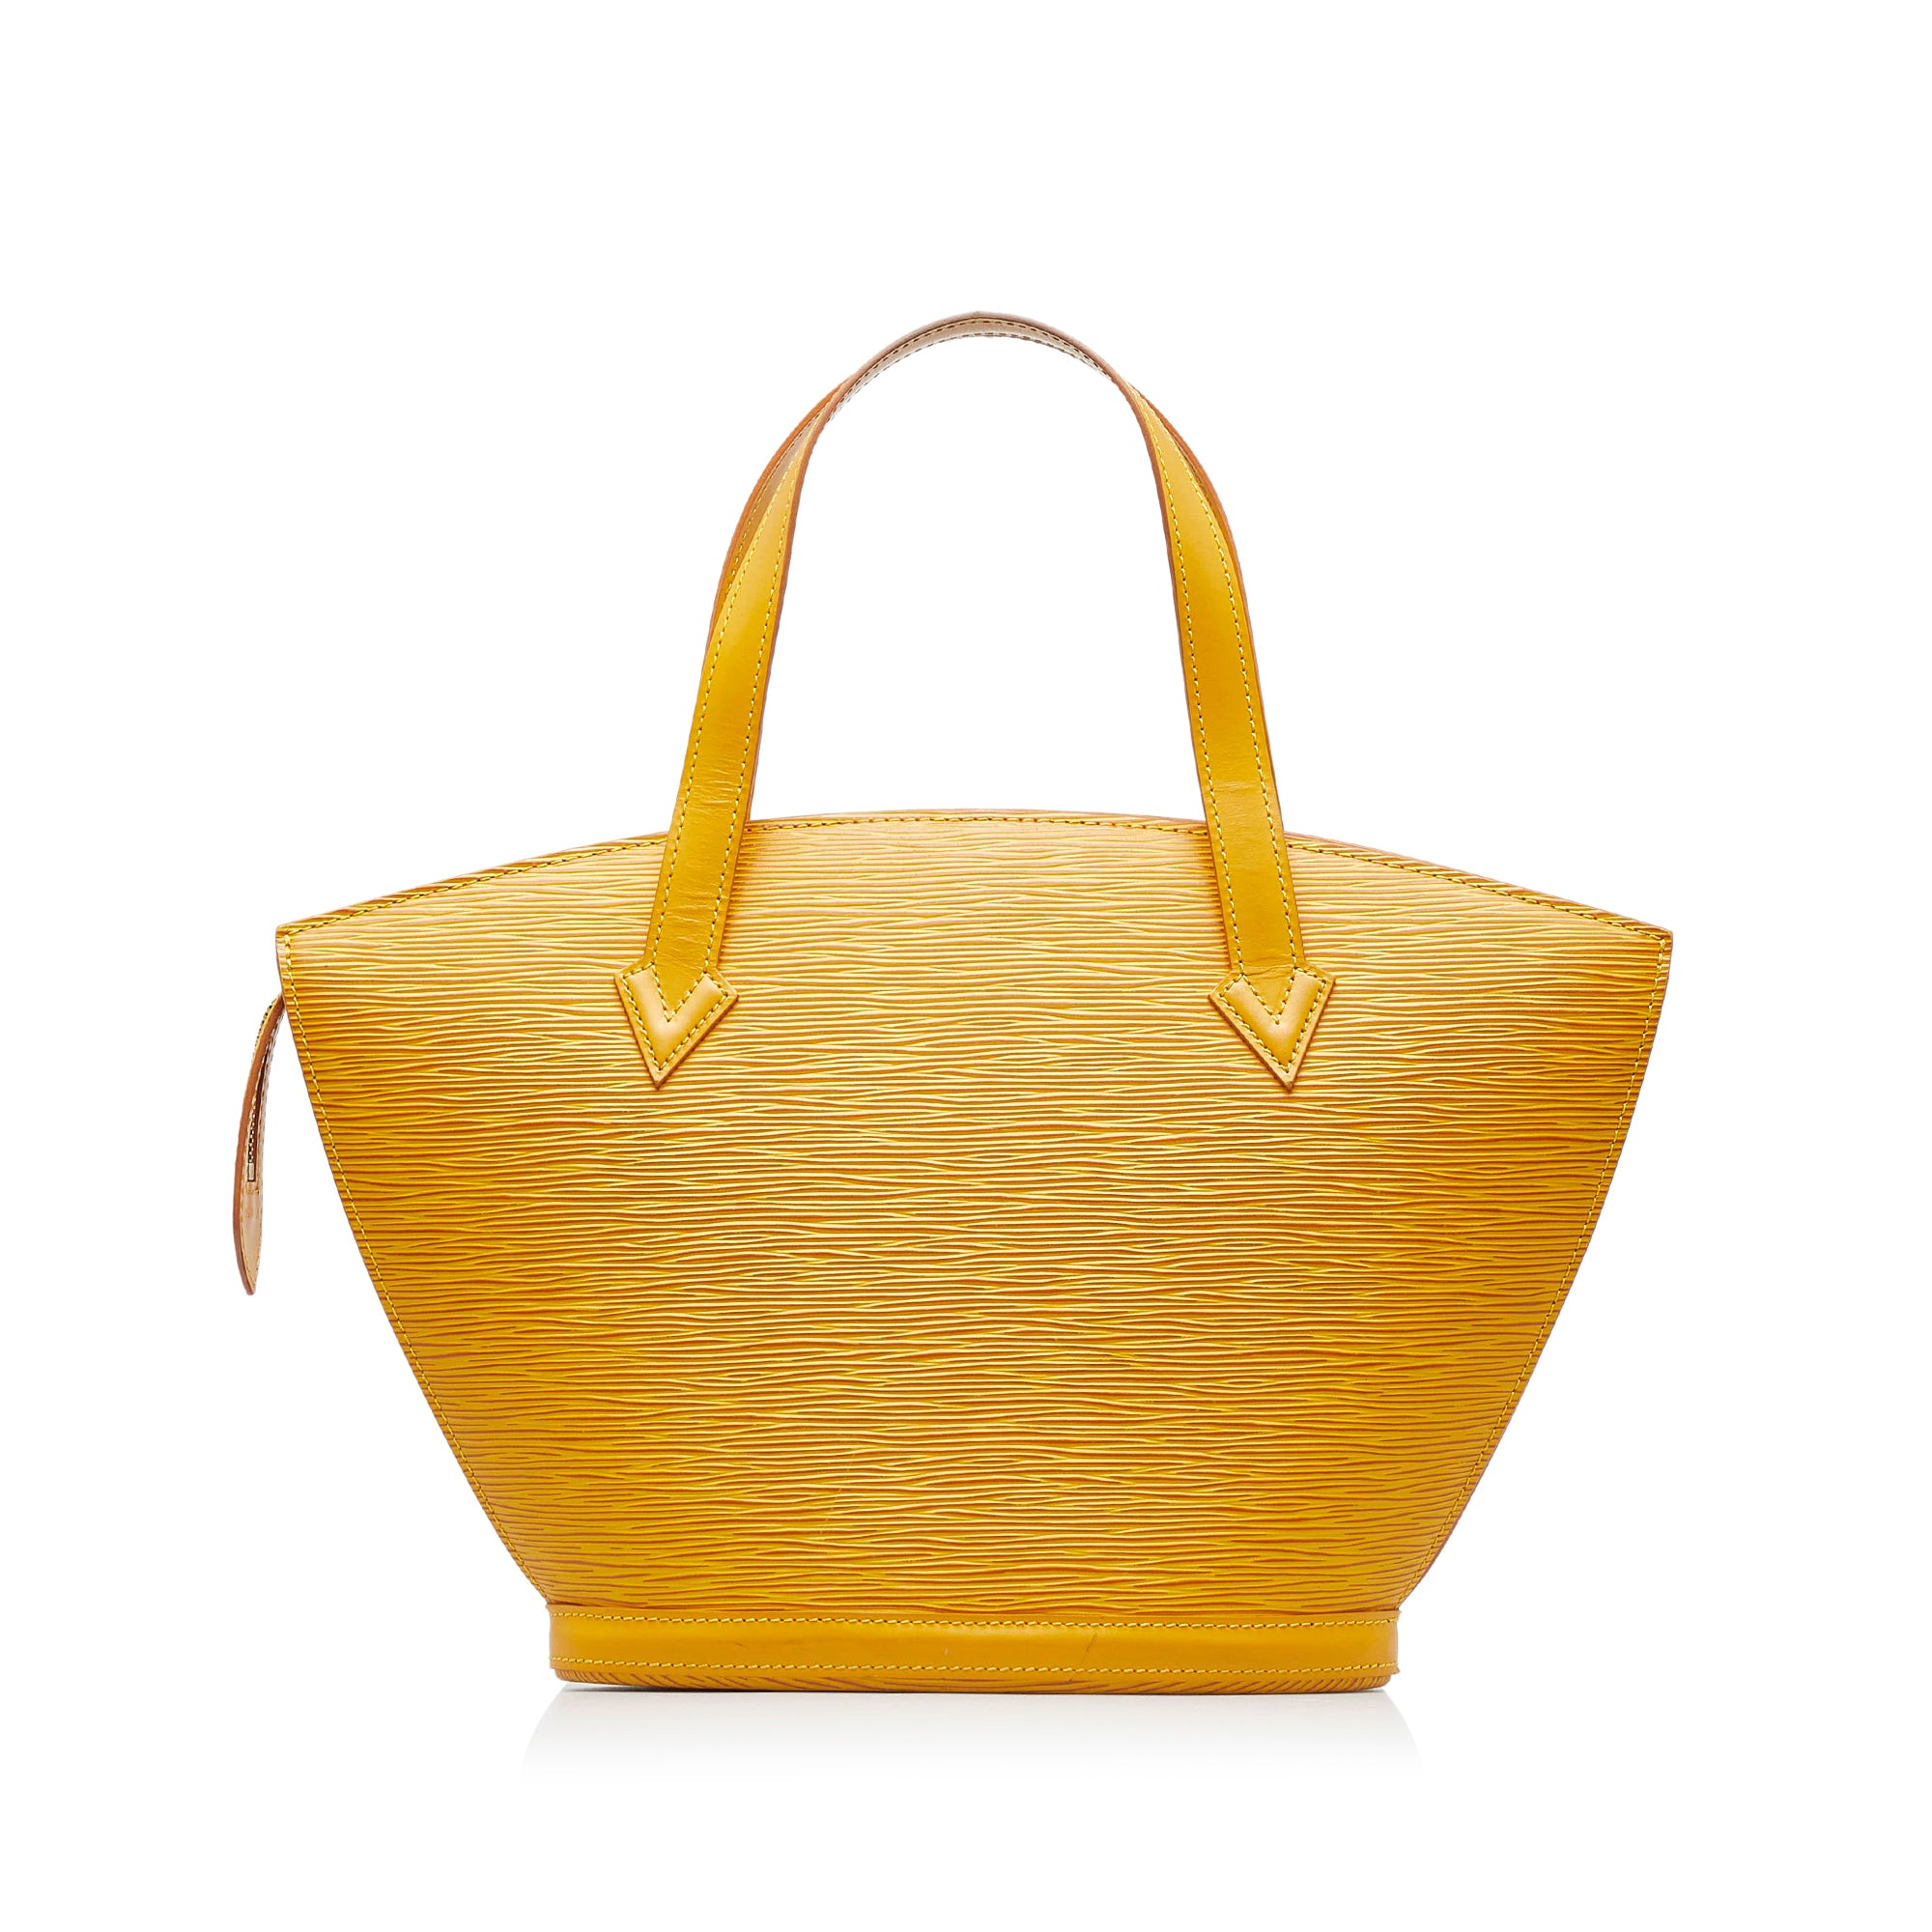 Louis Vuitton - Authenticated Over The Moon Handbag - Yellow for Women, Very Good Condition